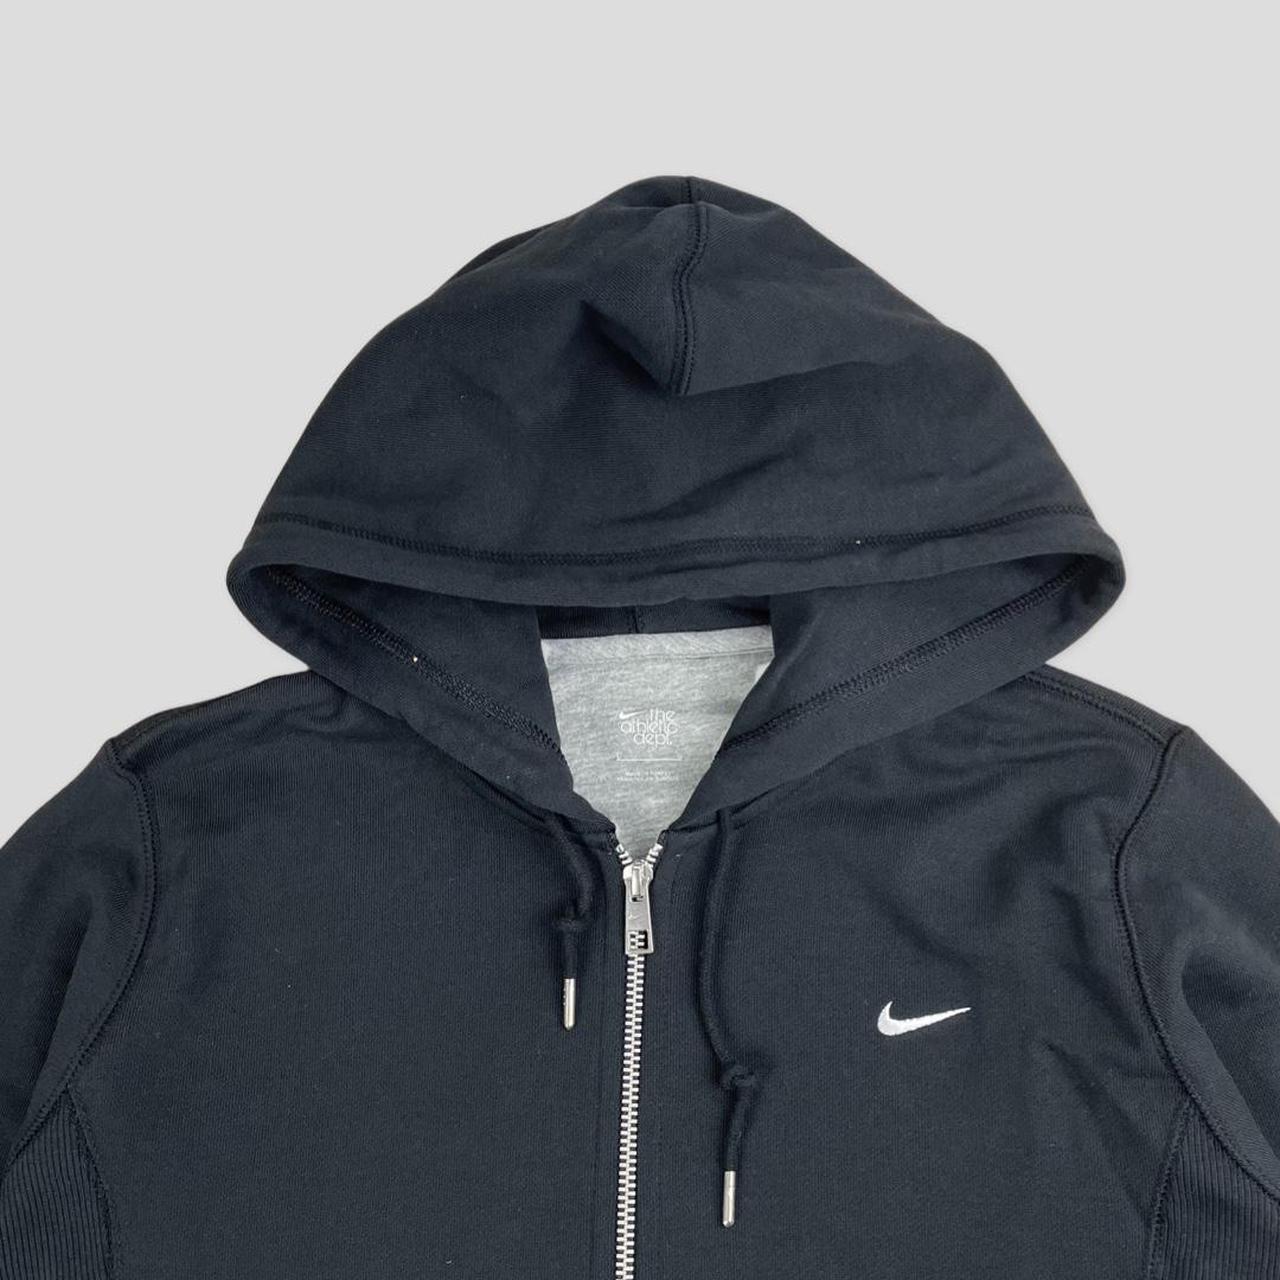 Women’s Nike hoodie black size large brand new with... - Depop